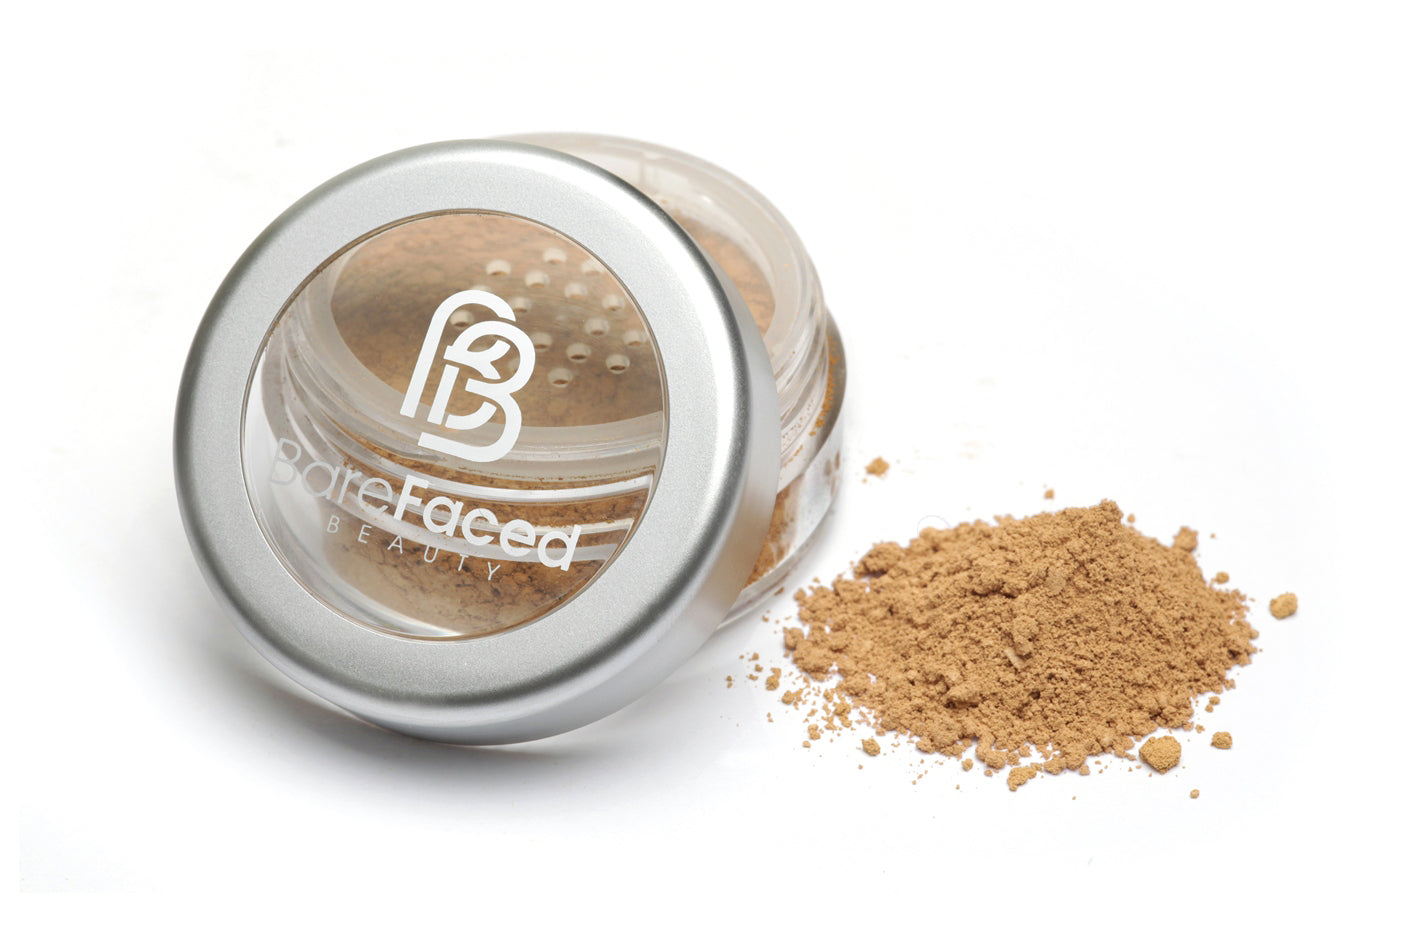 BareFaced Beauty Natural Finishing Powder in Cinnamon . Ethical mineral makeup. The powder mineral foundation is pictured in a clear plastic jar with a small pile of the powder sitting next to it.